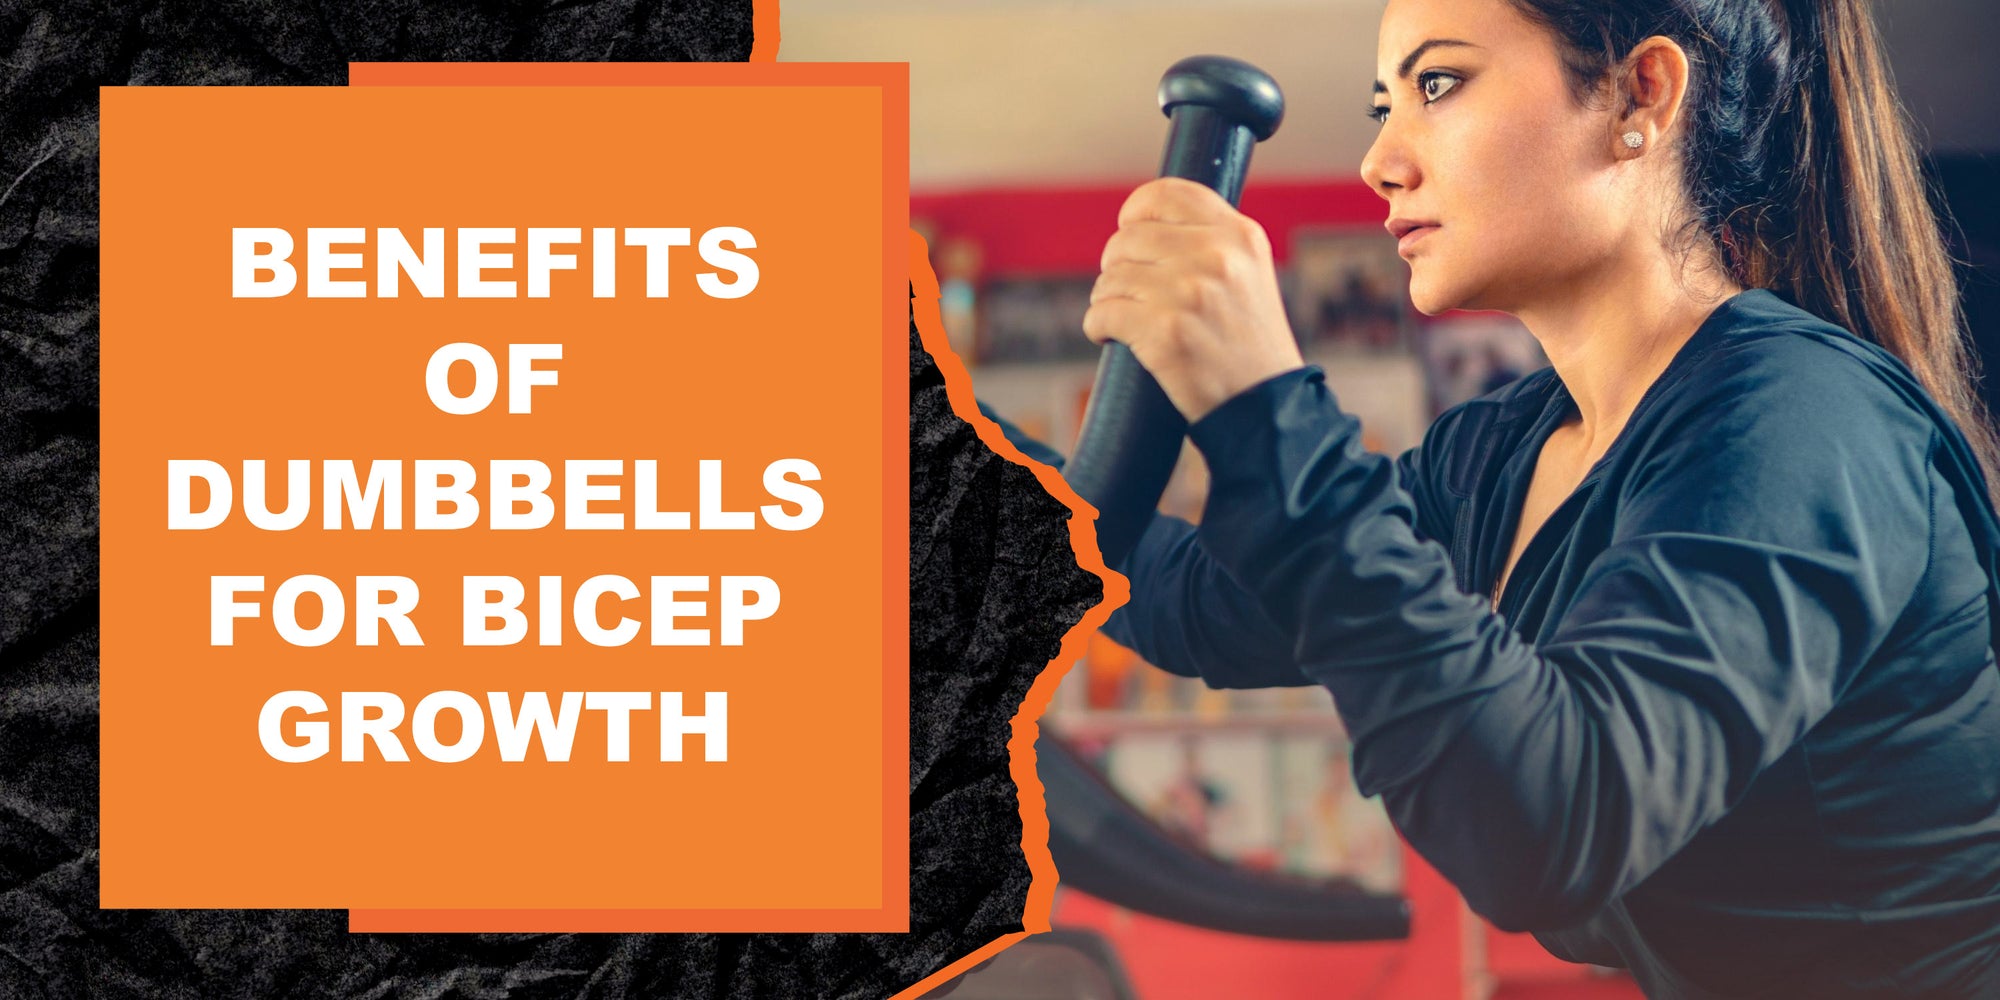 The Benefits of Training with Dumbbells for Bicep Growth